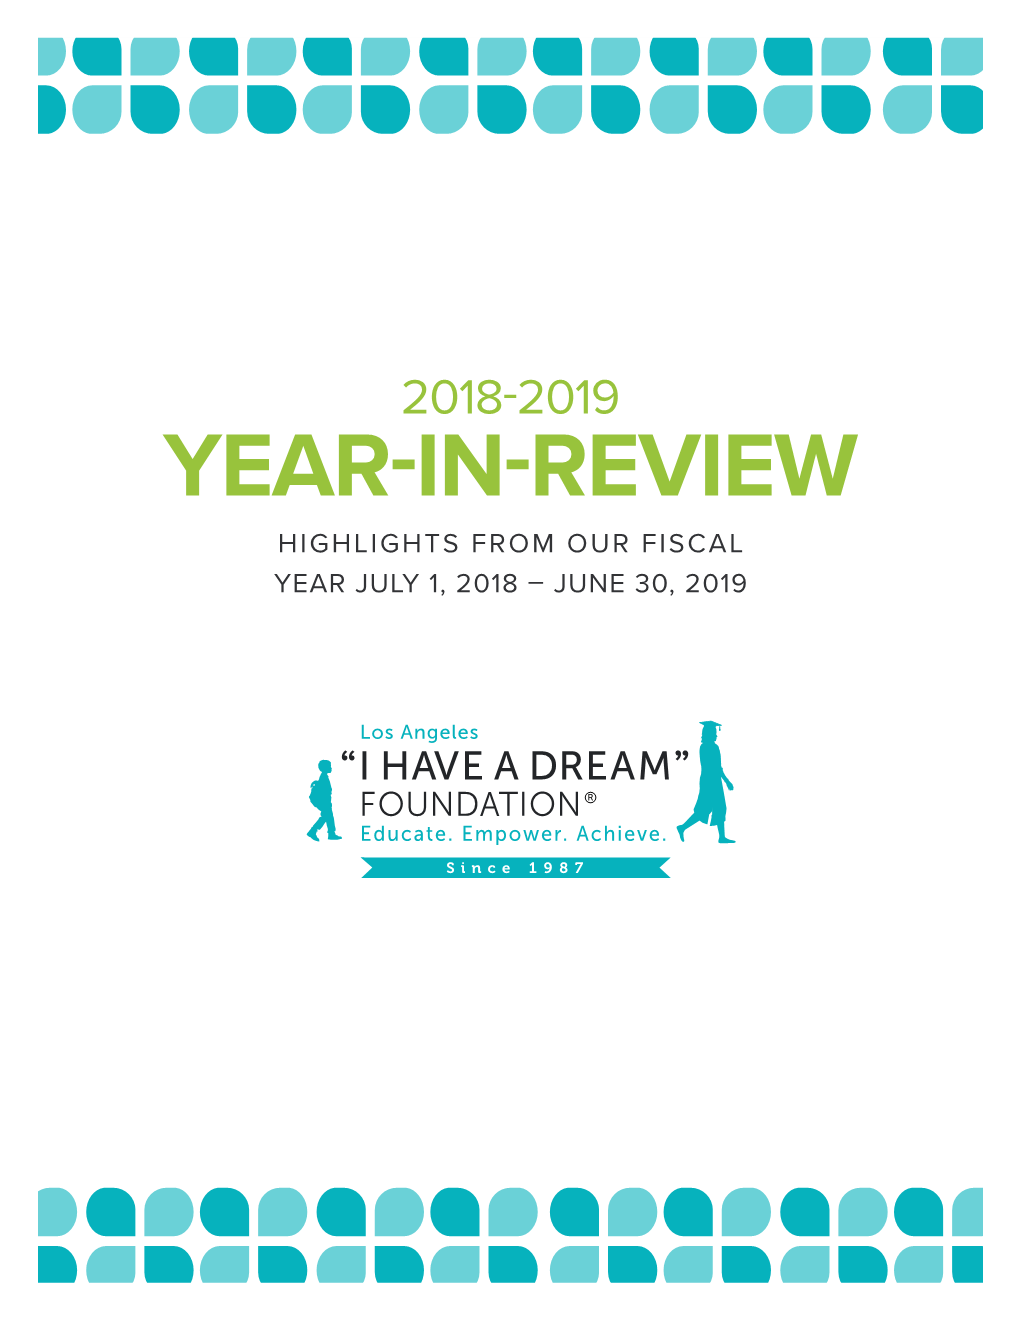 Year-In-Review 2018-2019